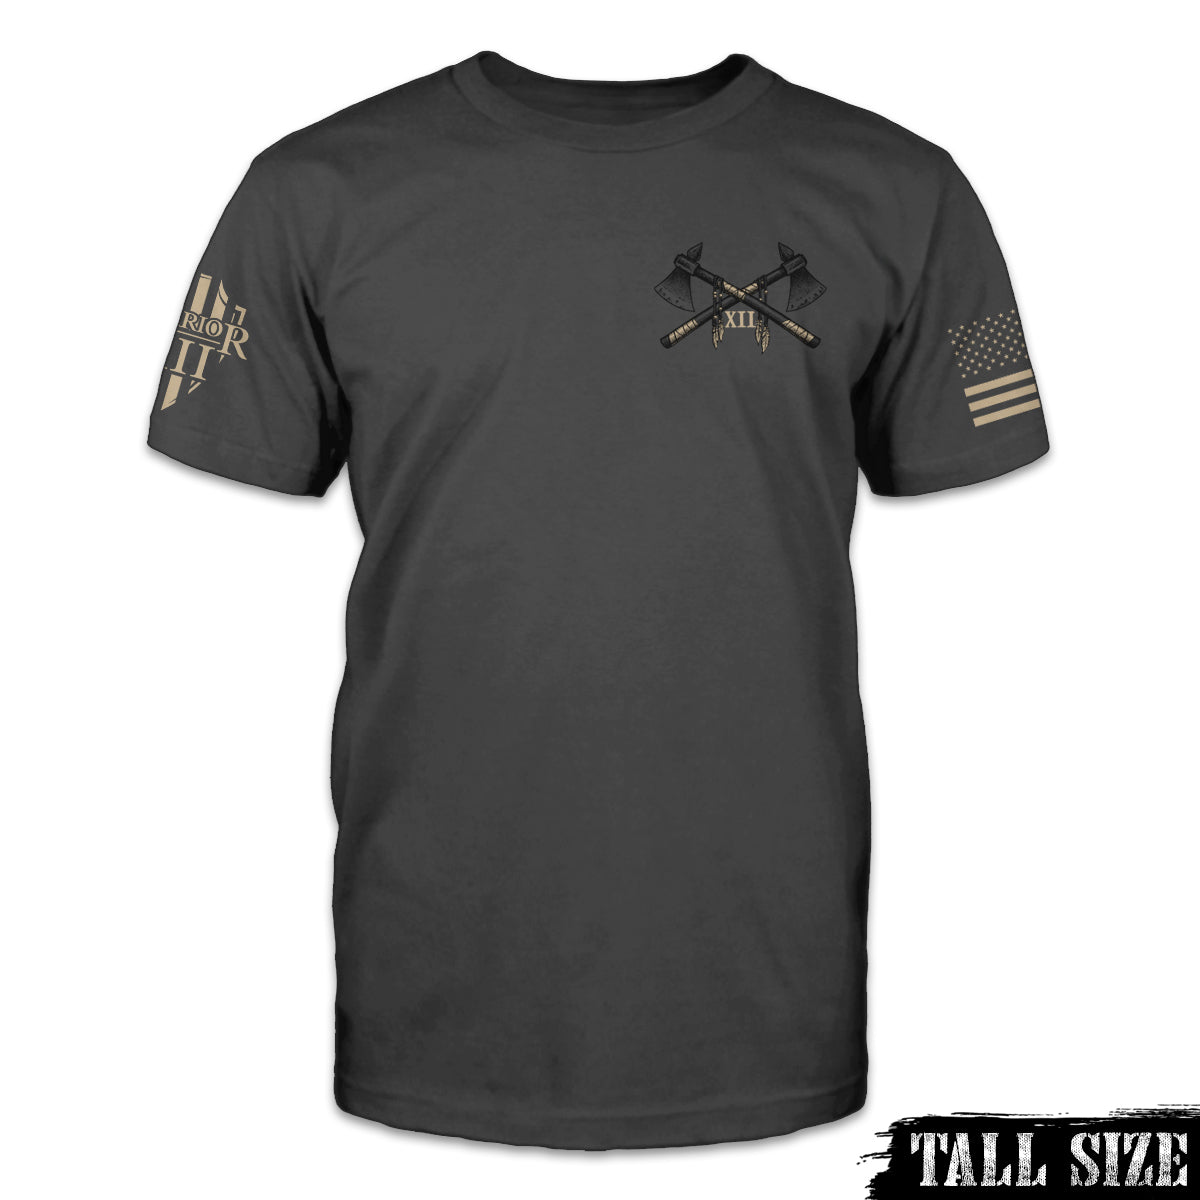 A dark grey tall size shirt with two axes crossed over printed on the front of the shirt.